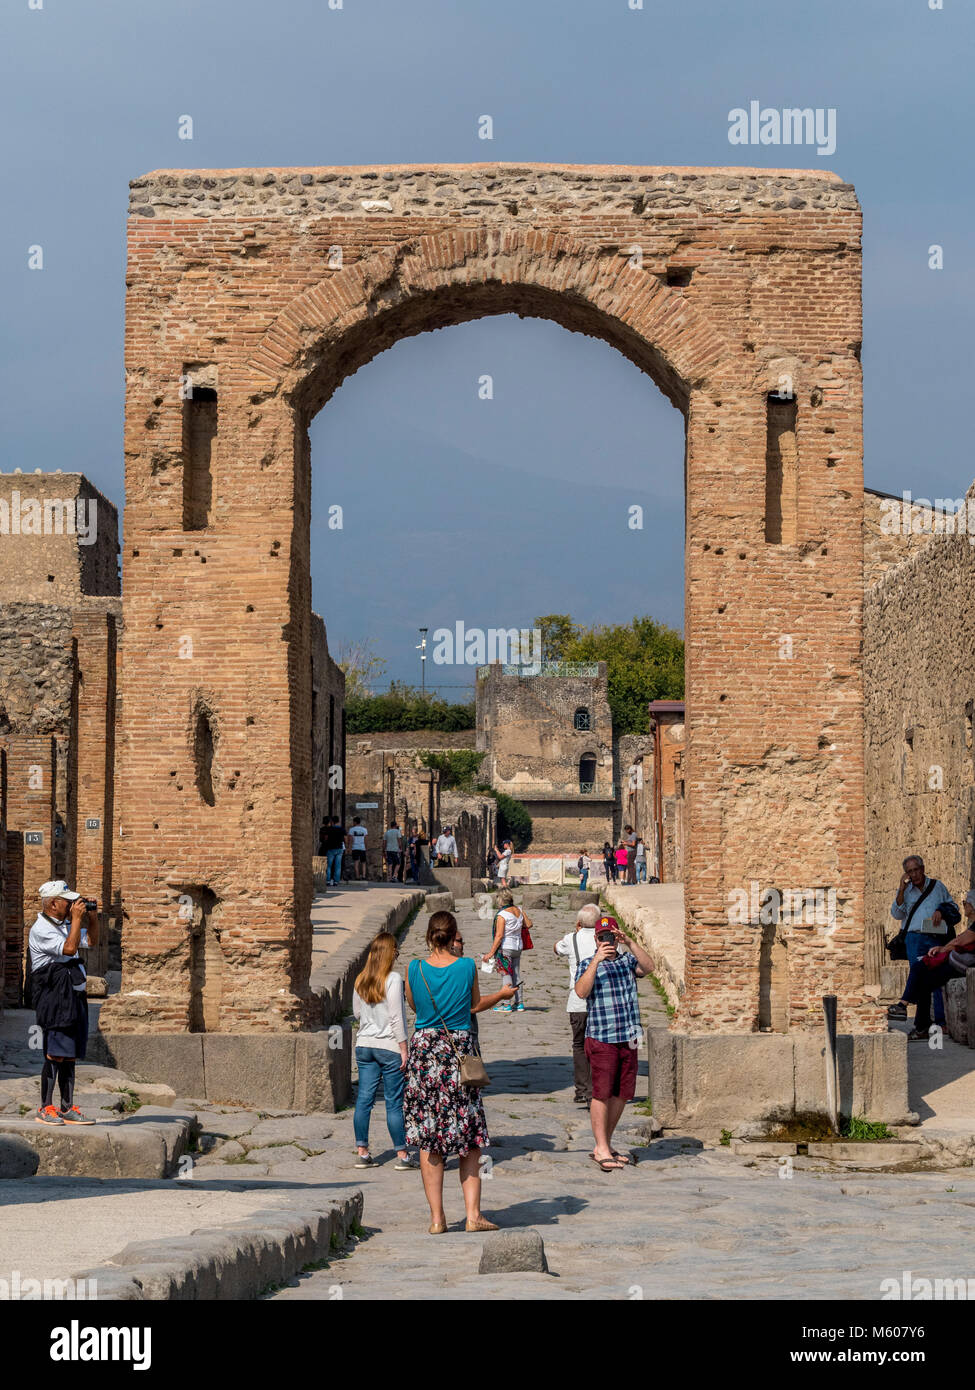 Tourists photographing the Honorary arch in Pompeii ruins, Italy. Stock Photo